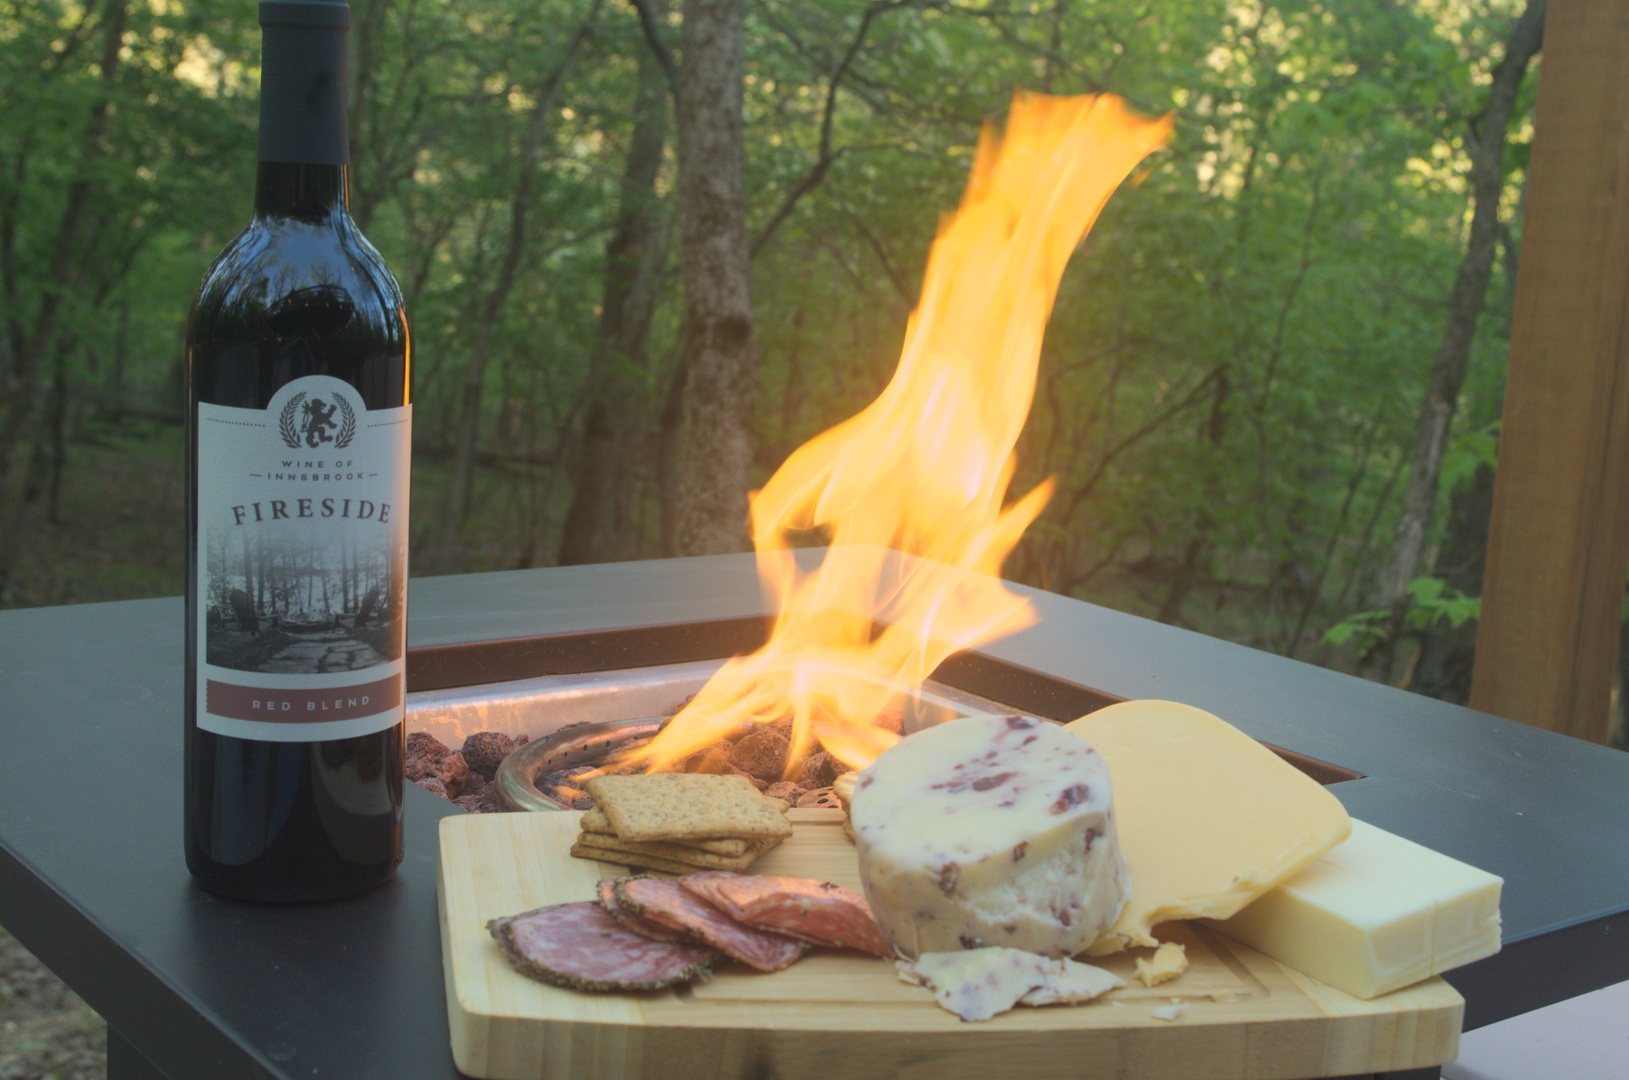 Enjoy the fire table and some Innsbrook wine available at the Market Cafe & Creamery.